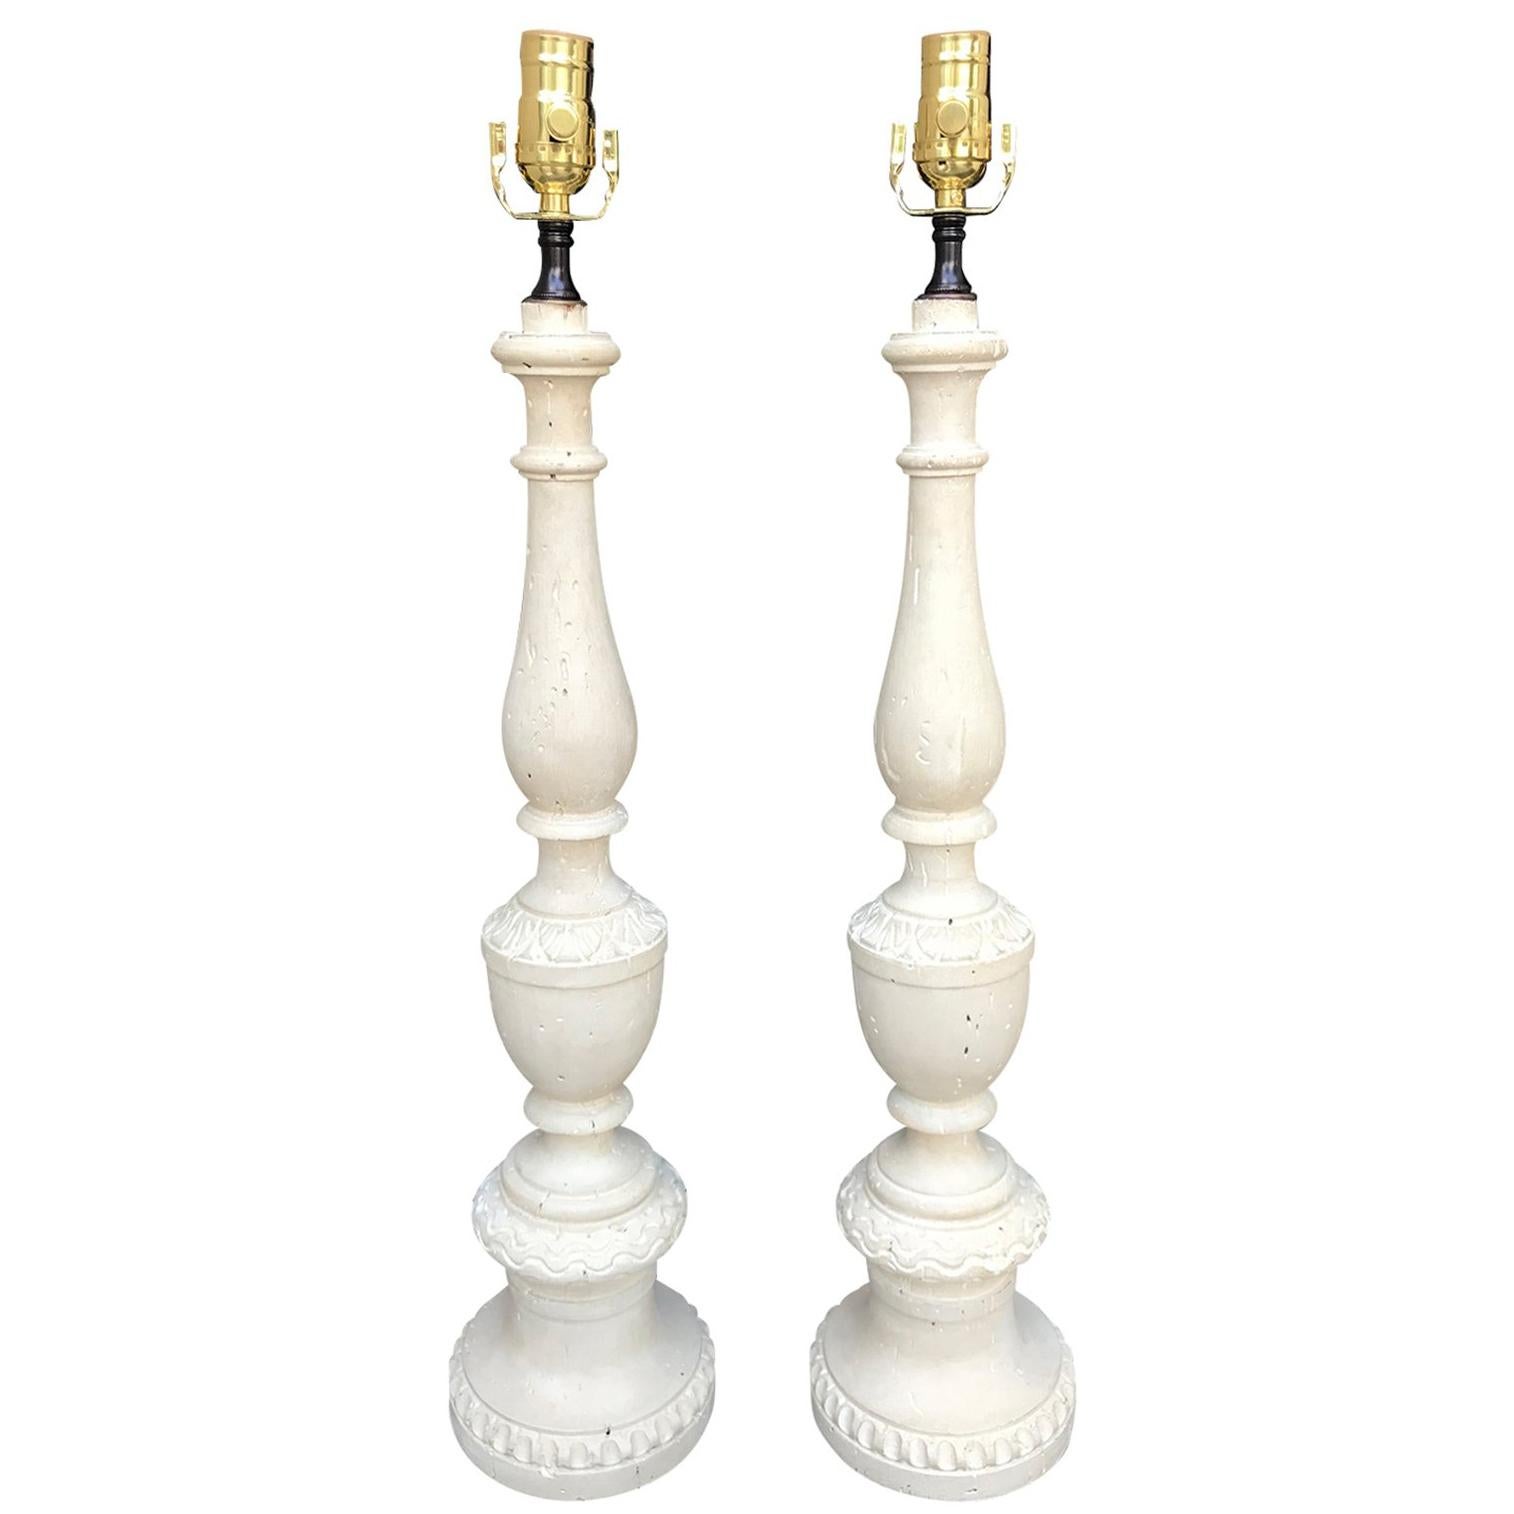 Pair of 18th-19th Century Italian Prickets as Lamps, White Finish